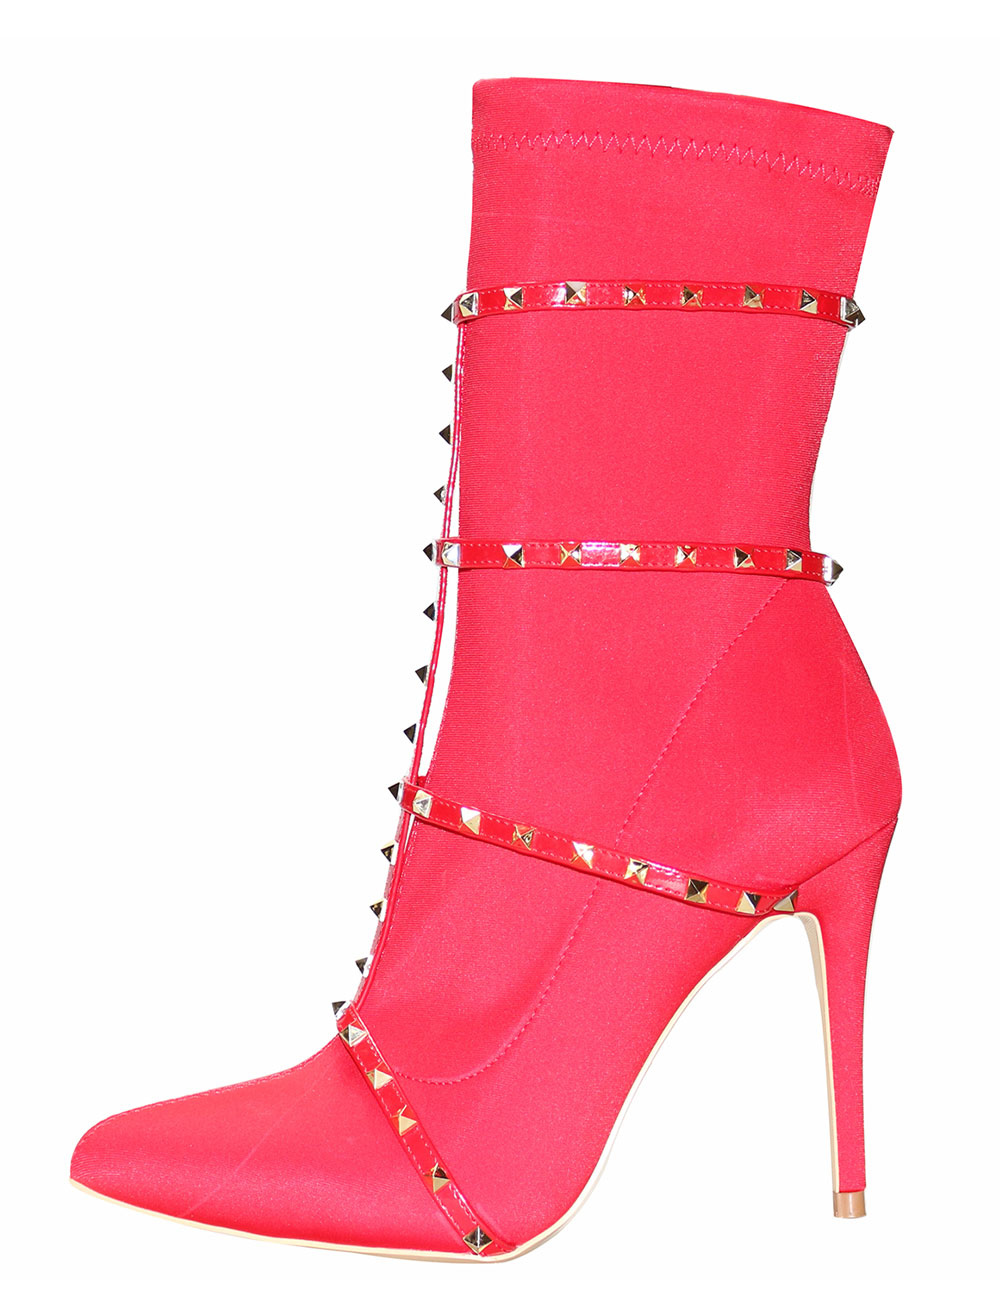 red stretch boots